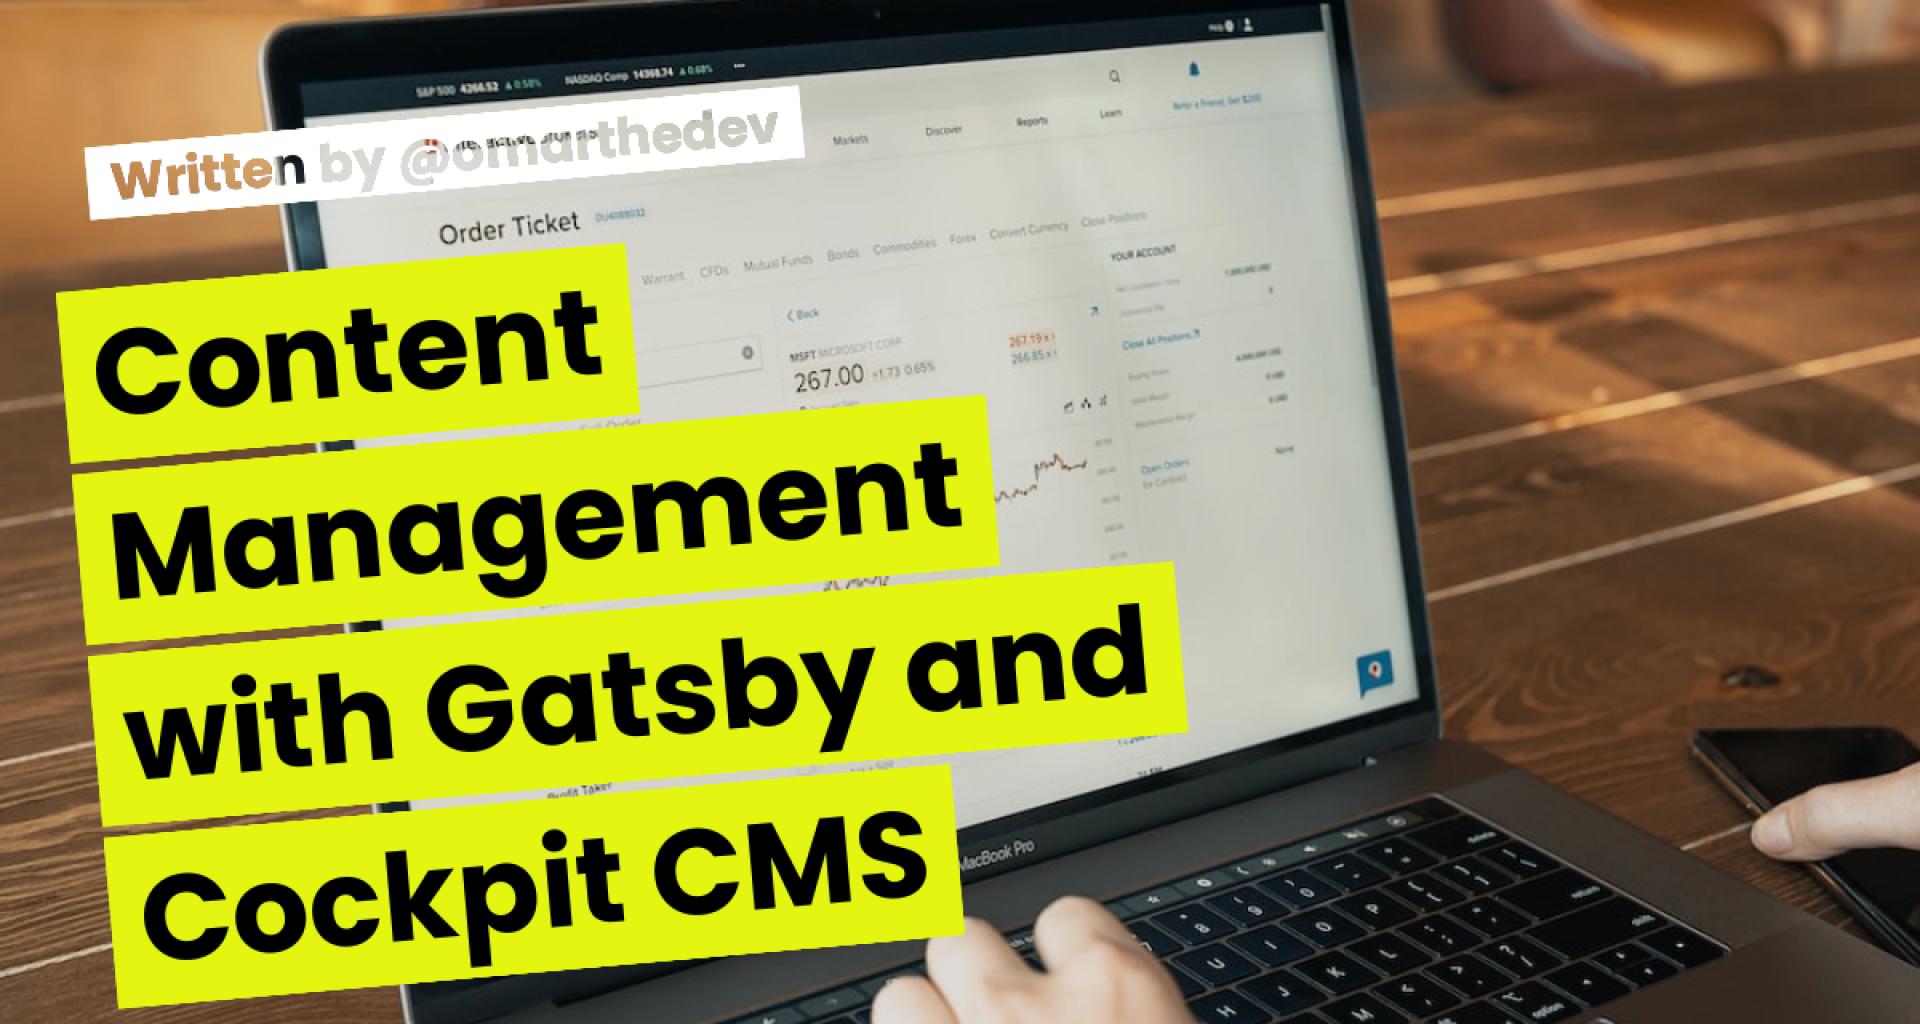 Content Management with Gatsby and Cockpit CMS